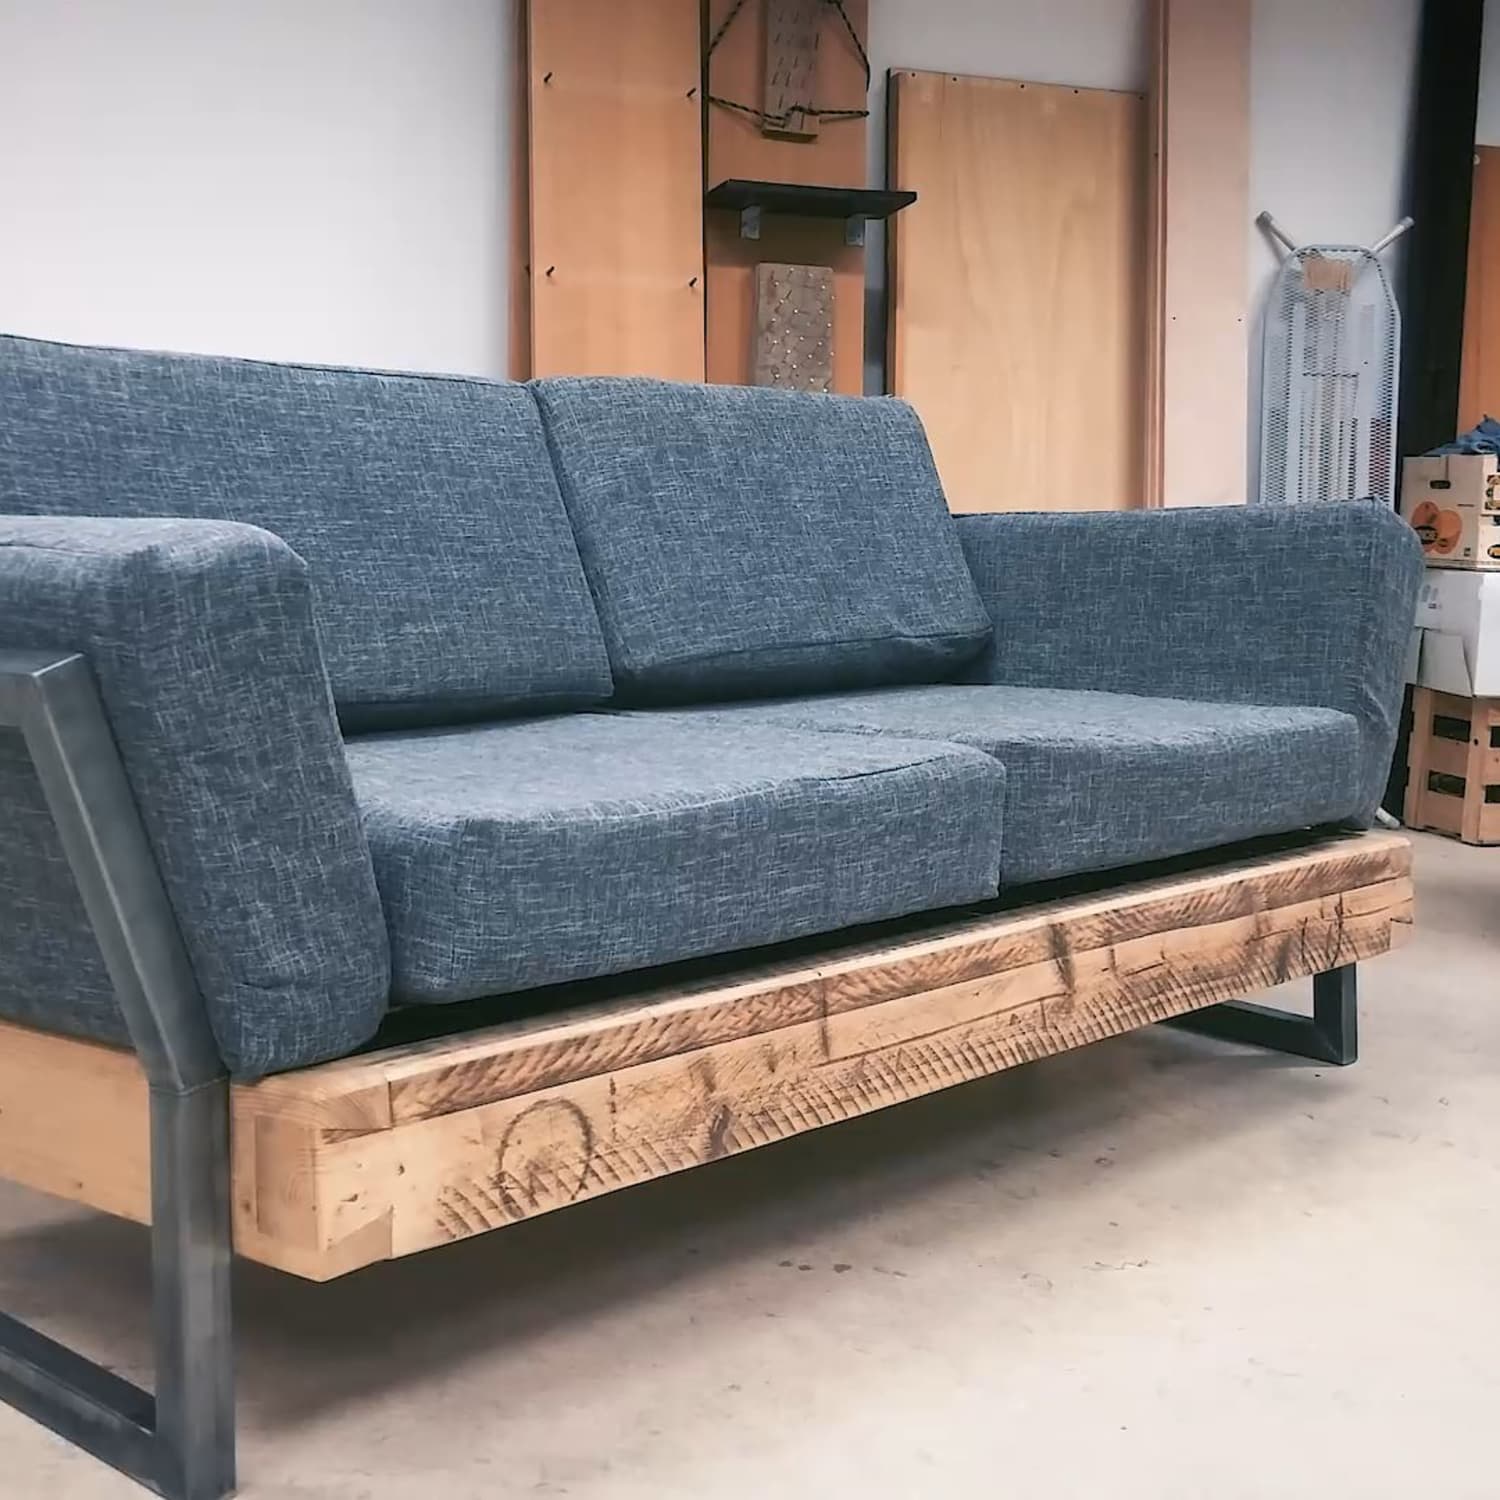 caricia Premio recoger One Reddit User Built This DIY Reclaimed Sofa for $100 | Apartment Therapy